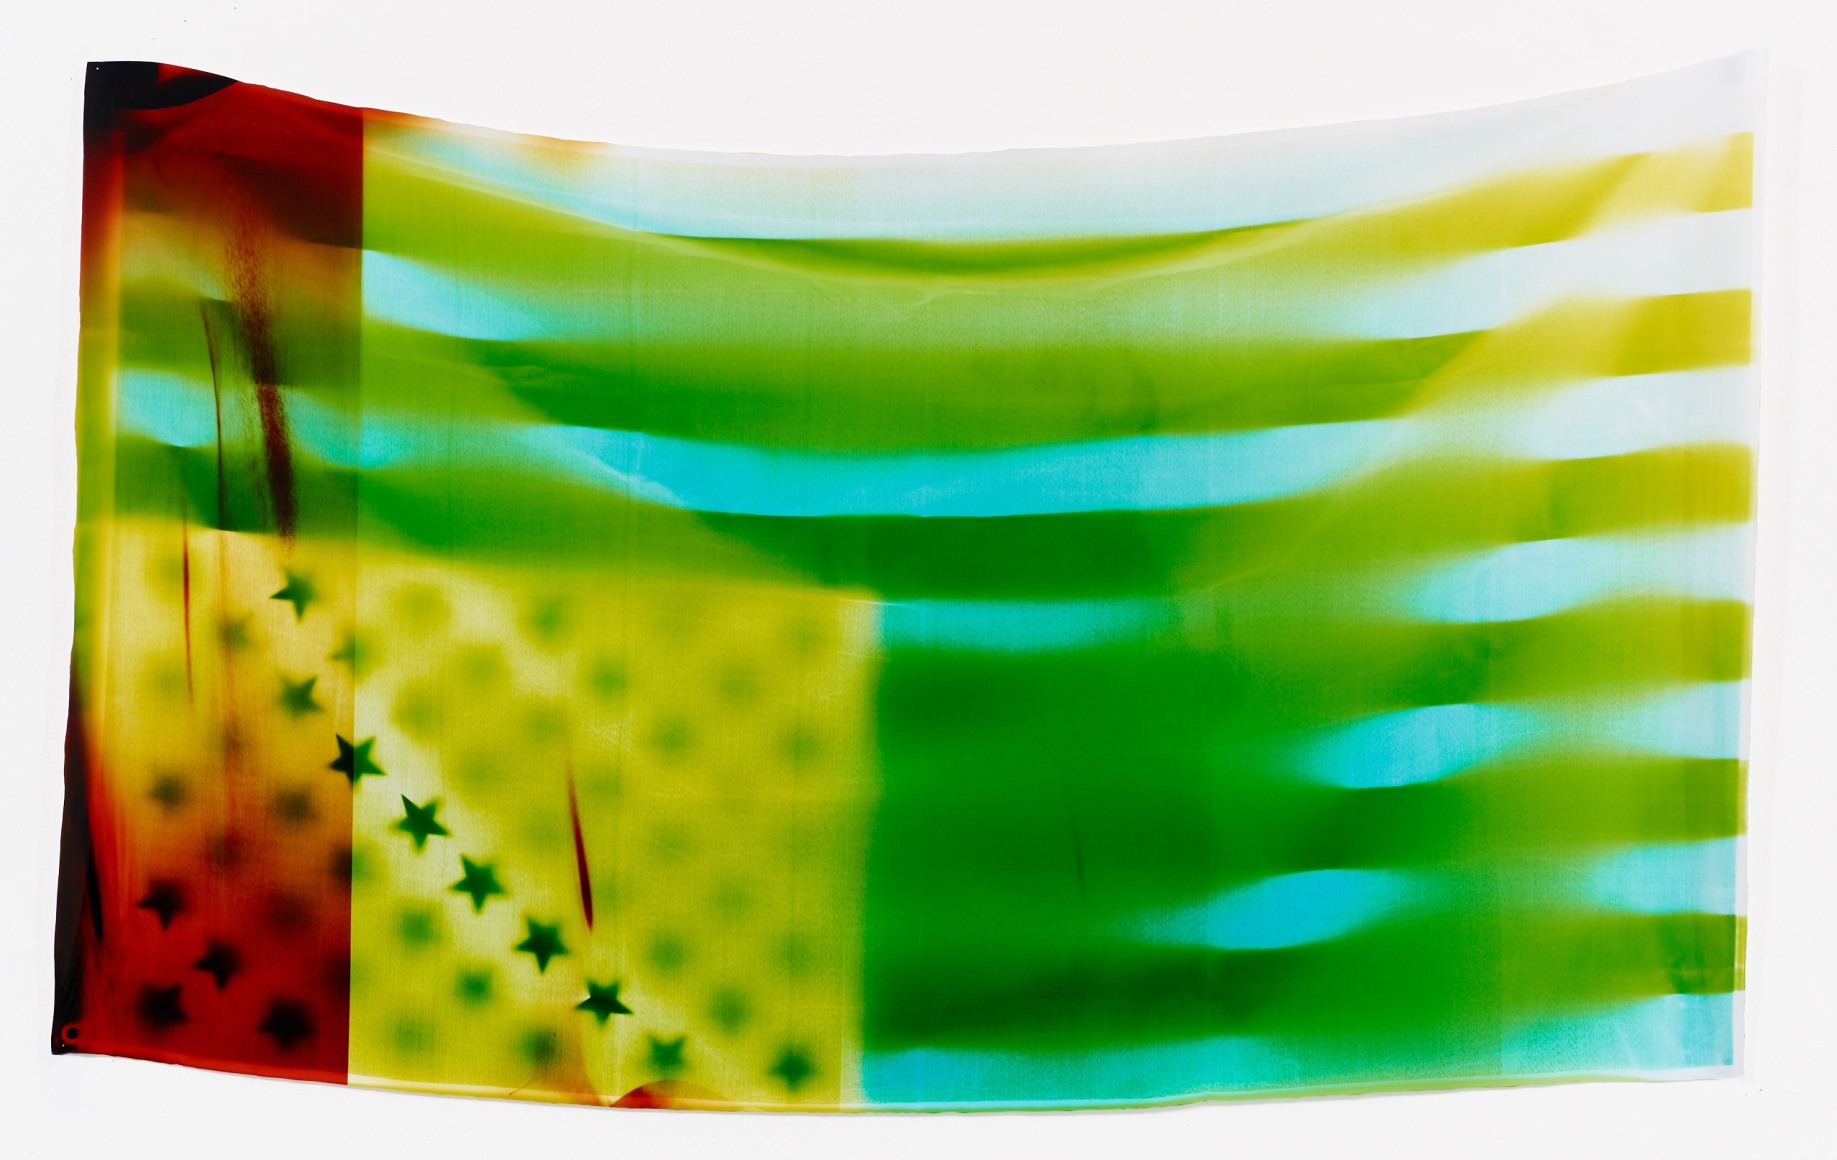 Lenticular Fabric sheets - Multicolor: Red, Yellow, Green, Black